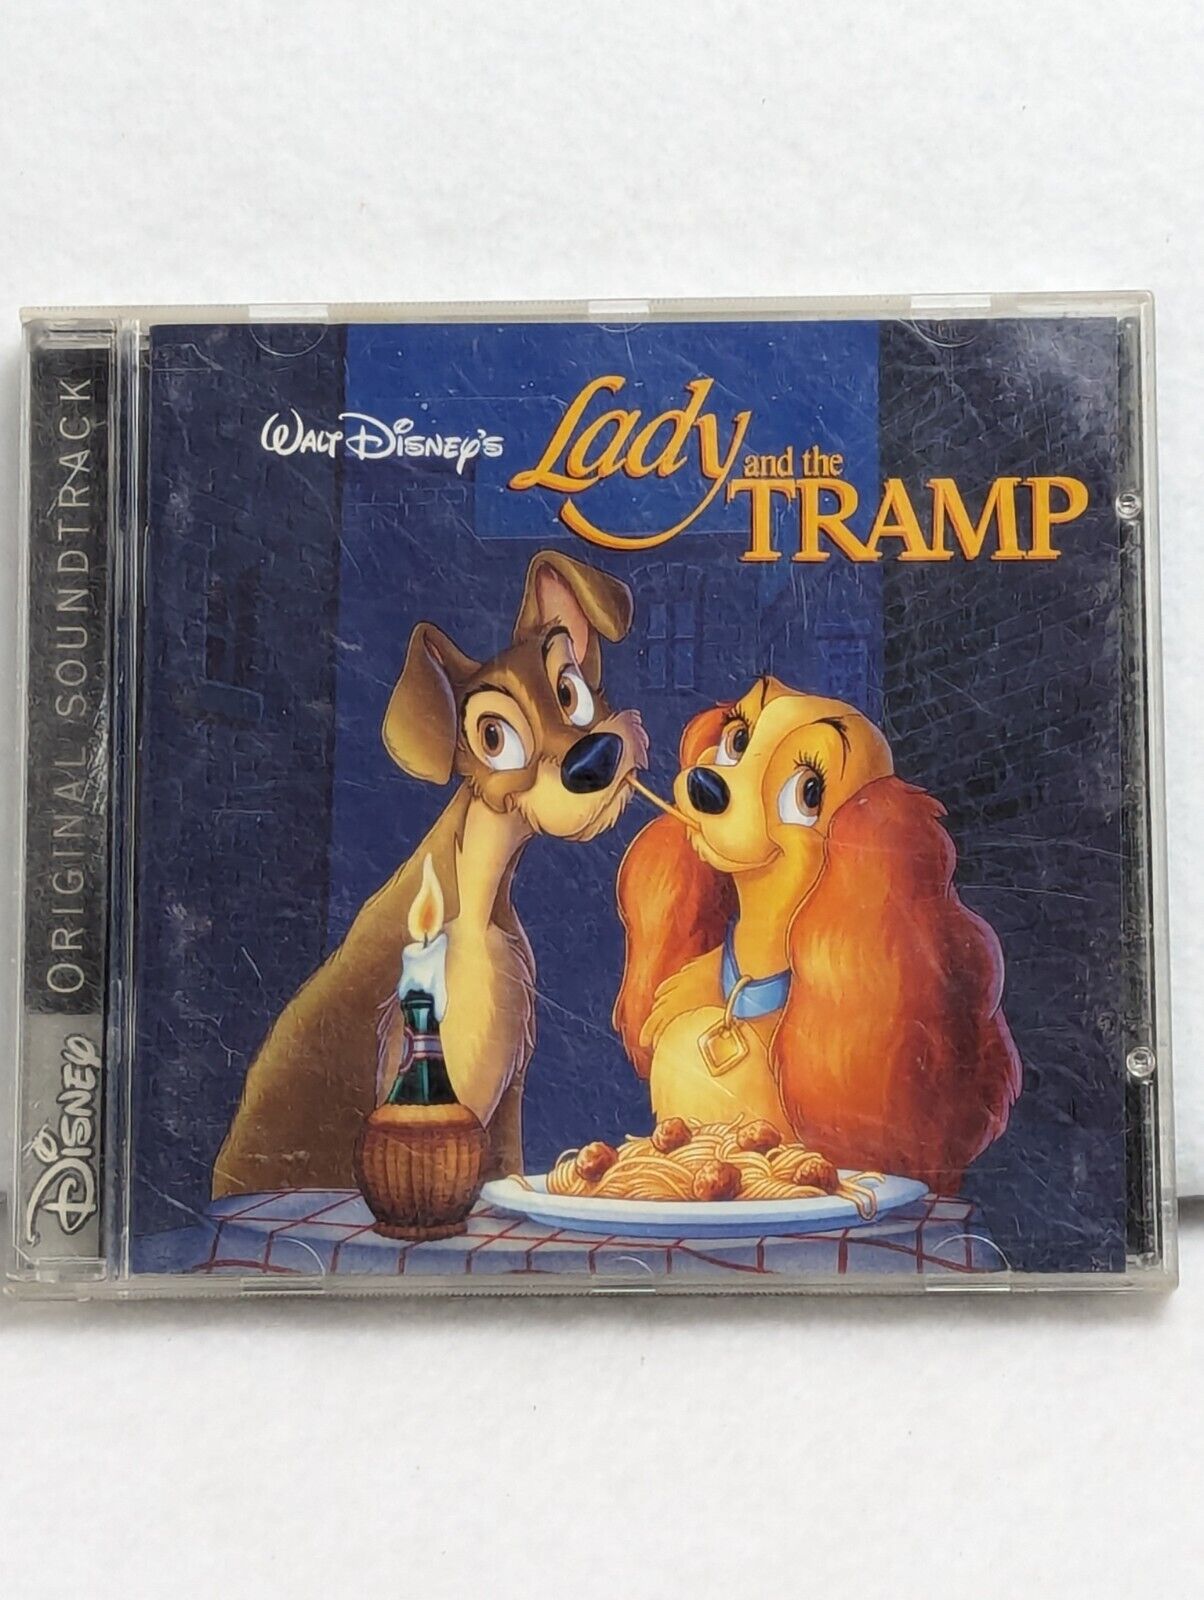 Walt Disney's Lady and the Tramp [Original Motion Picture Soundtrack] CD